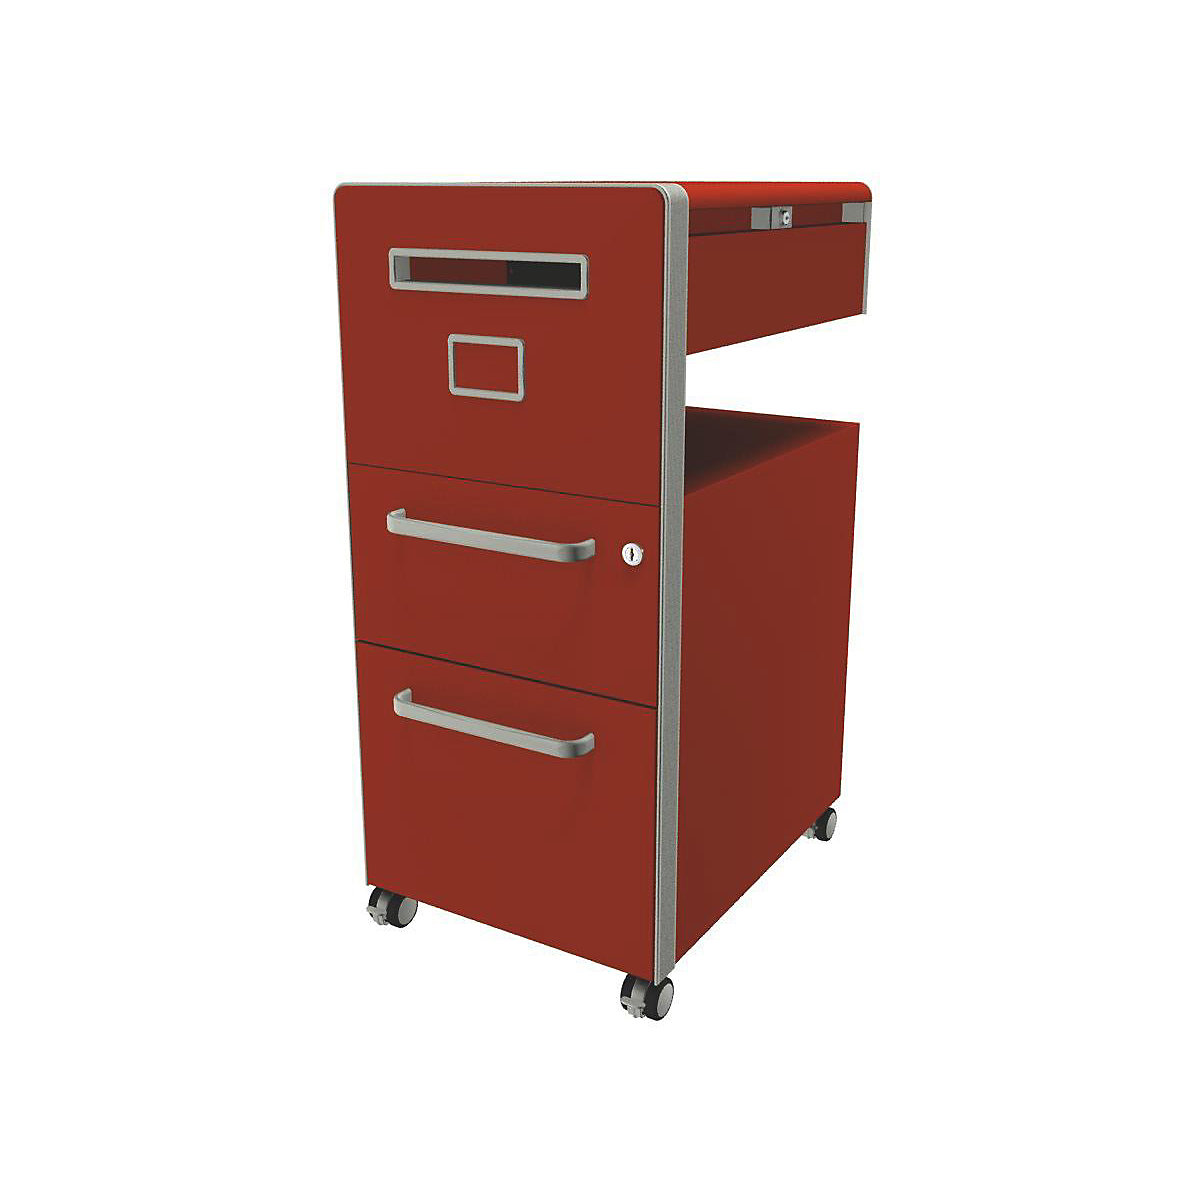 Bite™ pedestal furniture, with 1 pin board, opens on the left side – BISLEY, with 1 universal drawer, 1 suspension file drawer, sevilla-10